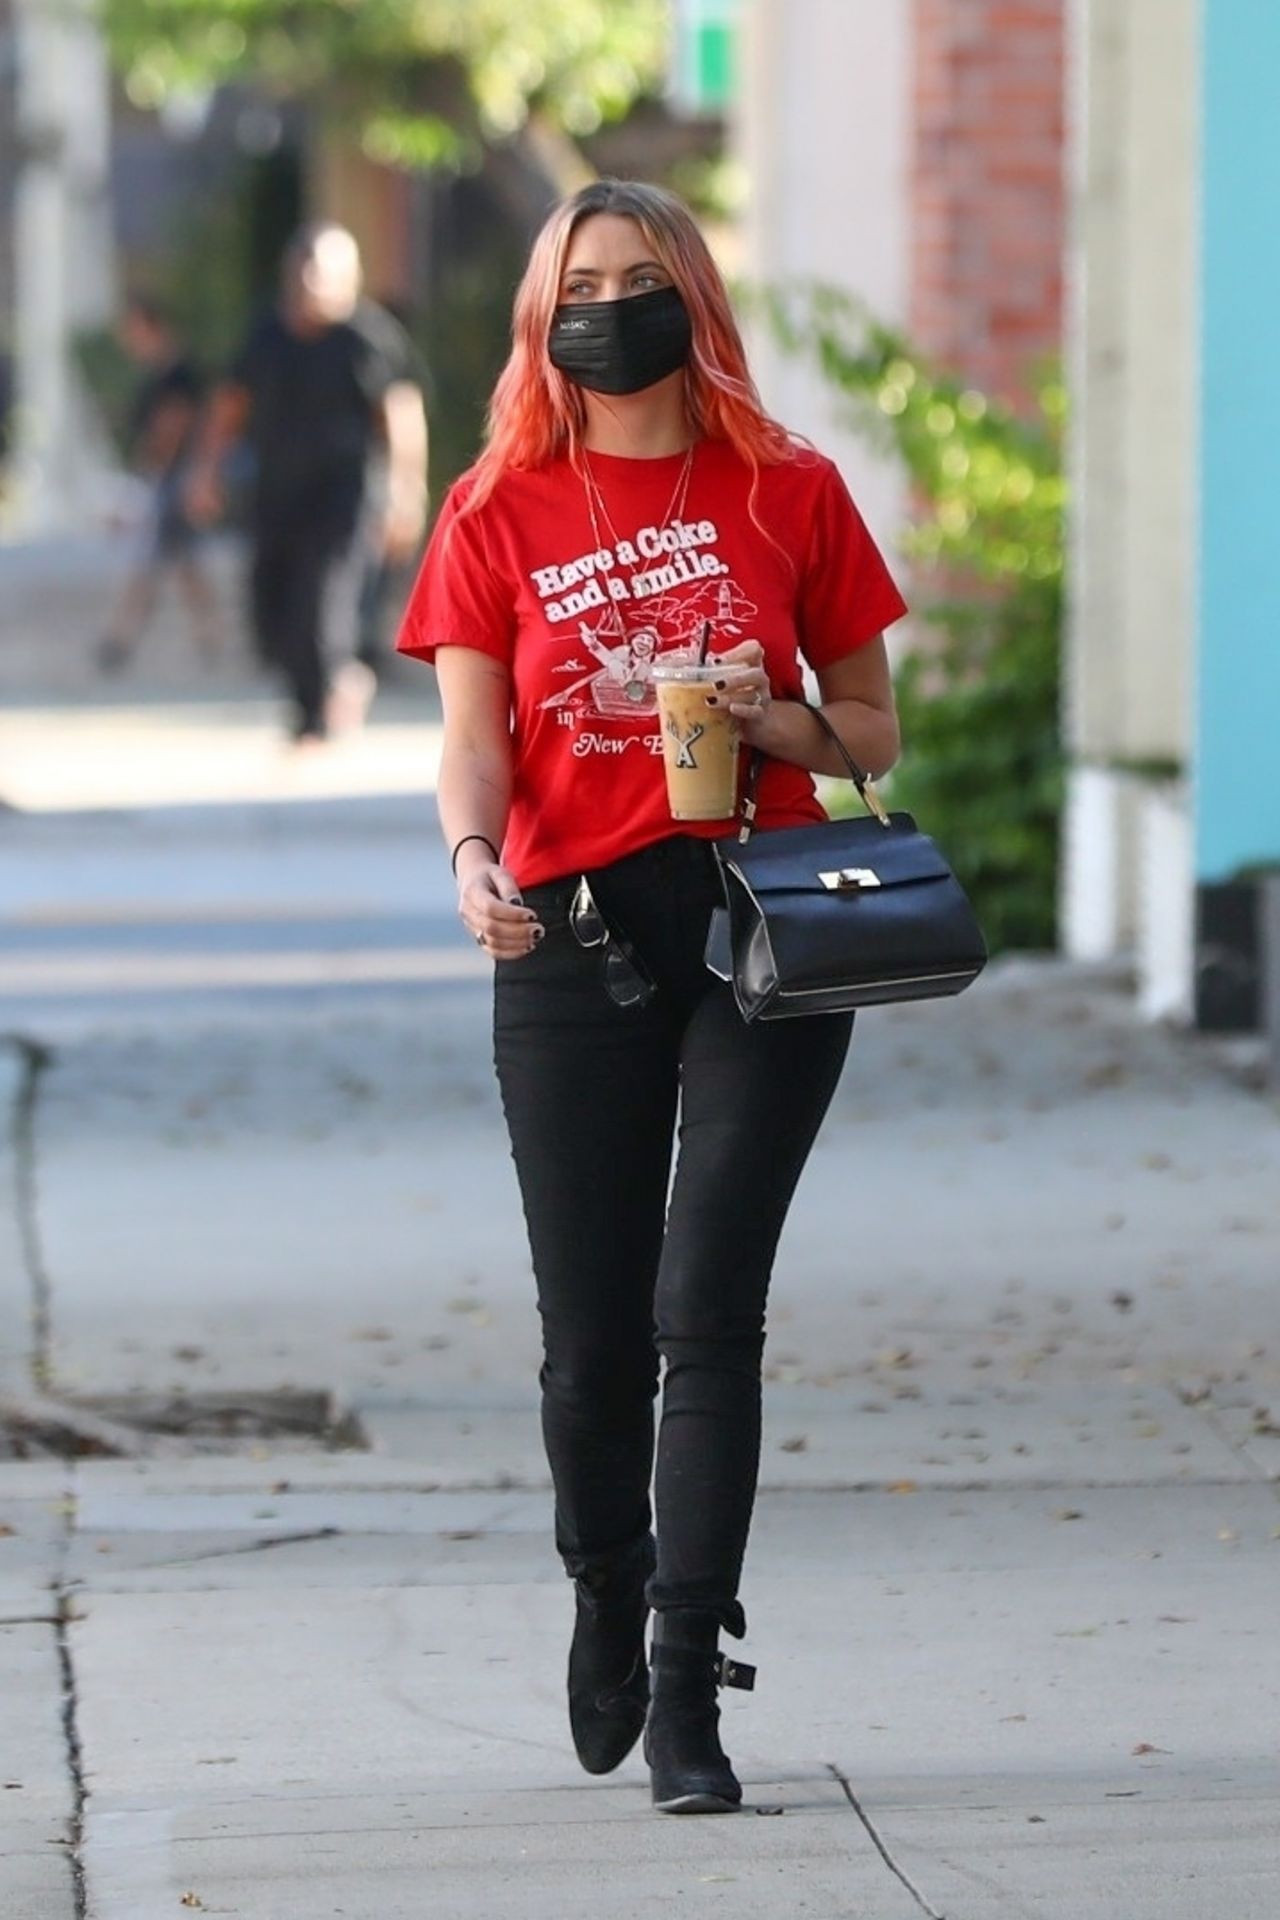 ashley-benson-in-a-red-coca-cola-branded-t-shirt-at-alfred-s-in-los-angeles-10-13-2020-9.jpg